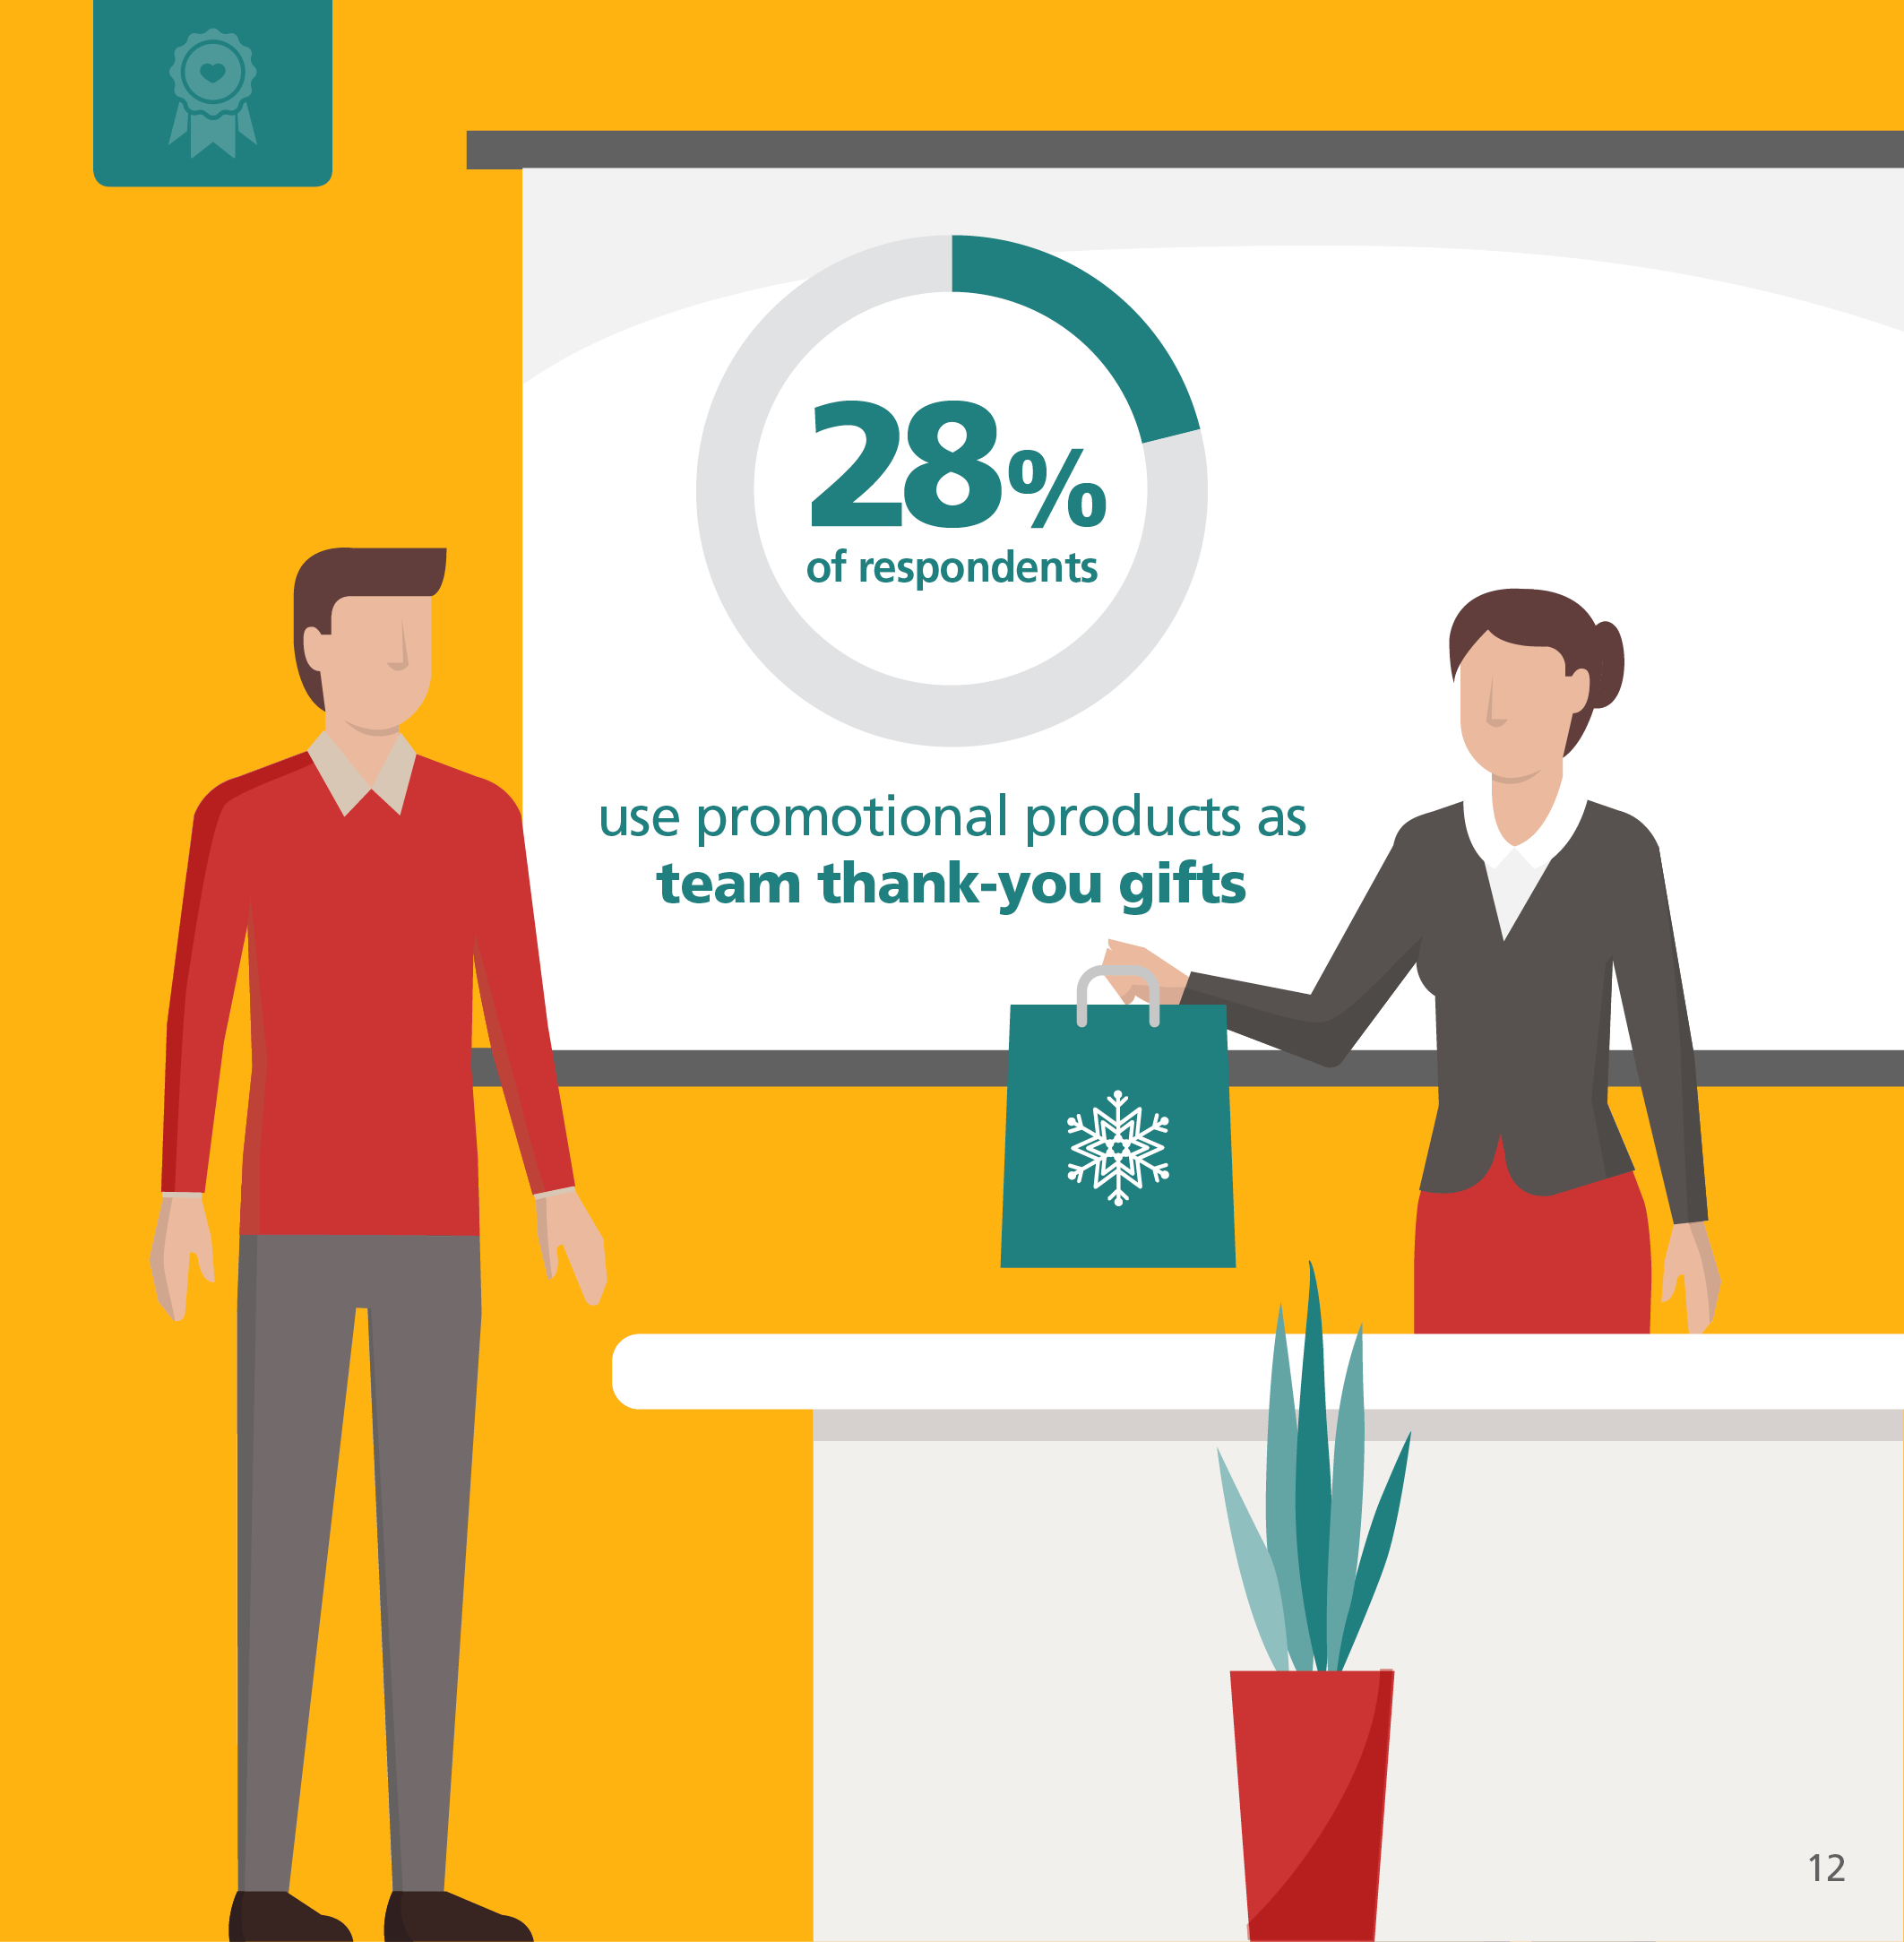 28% of respondents use promotional products as team thank-you gifts